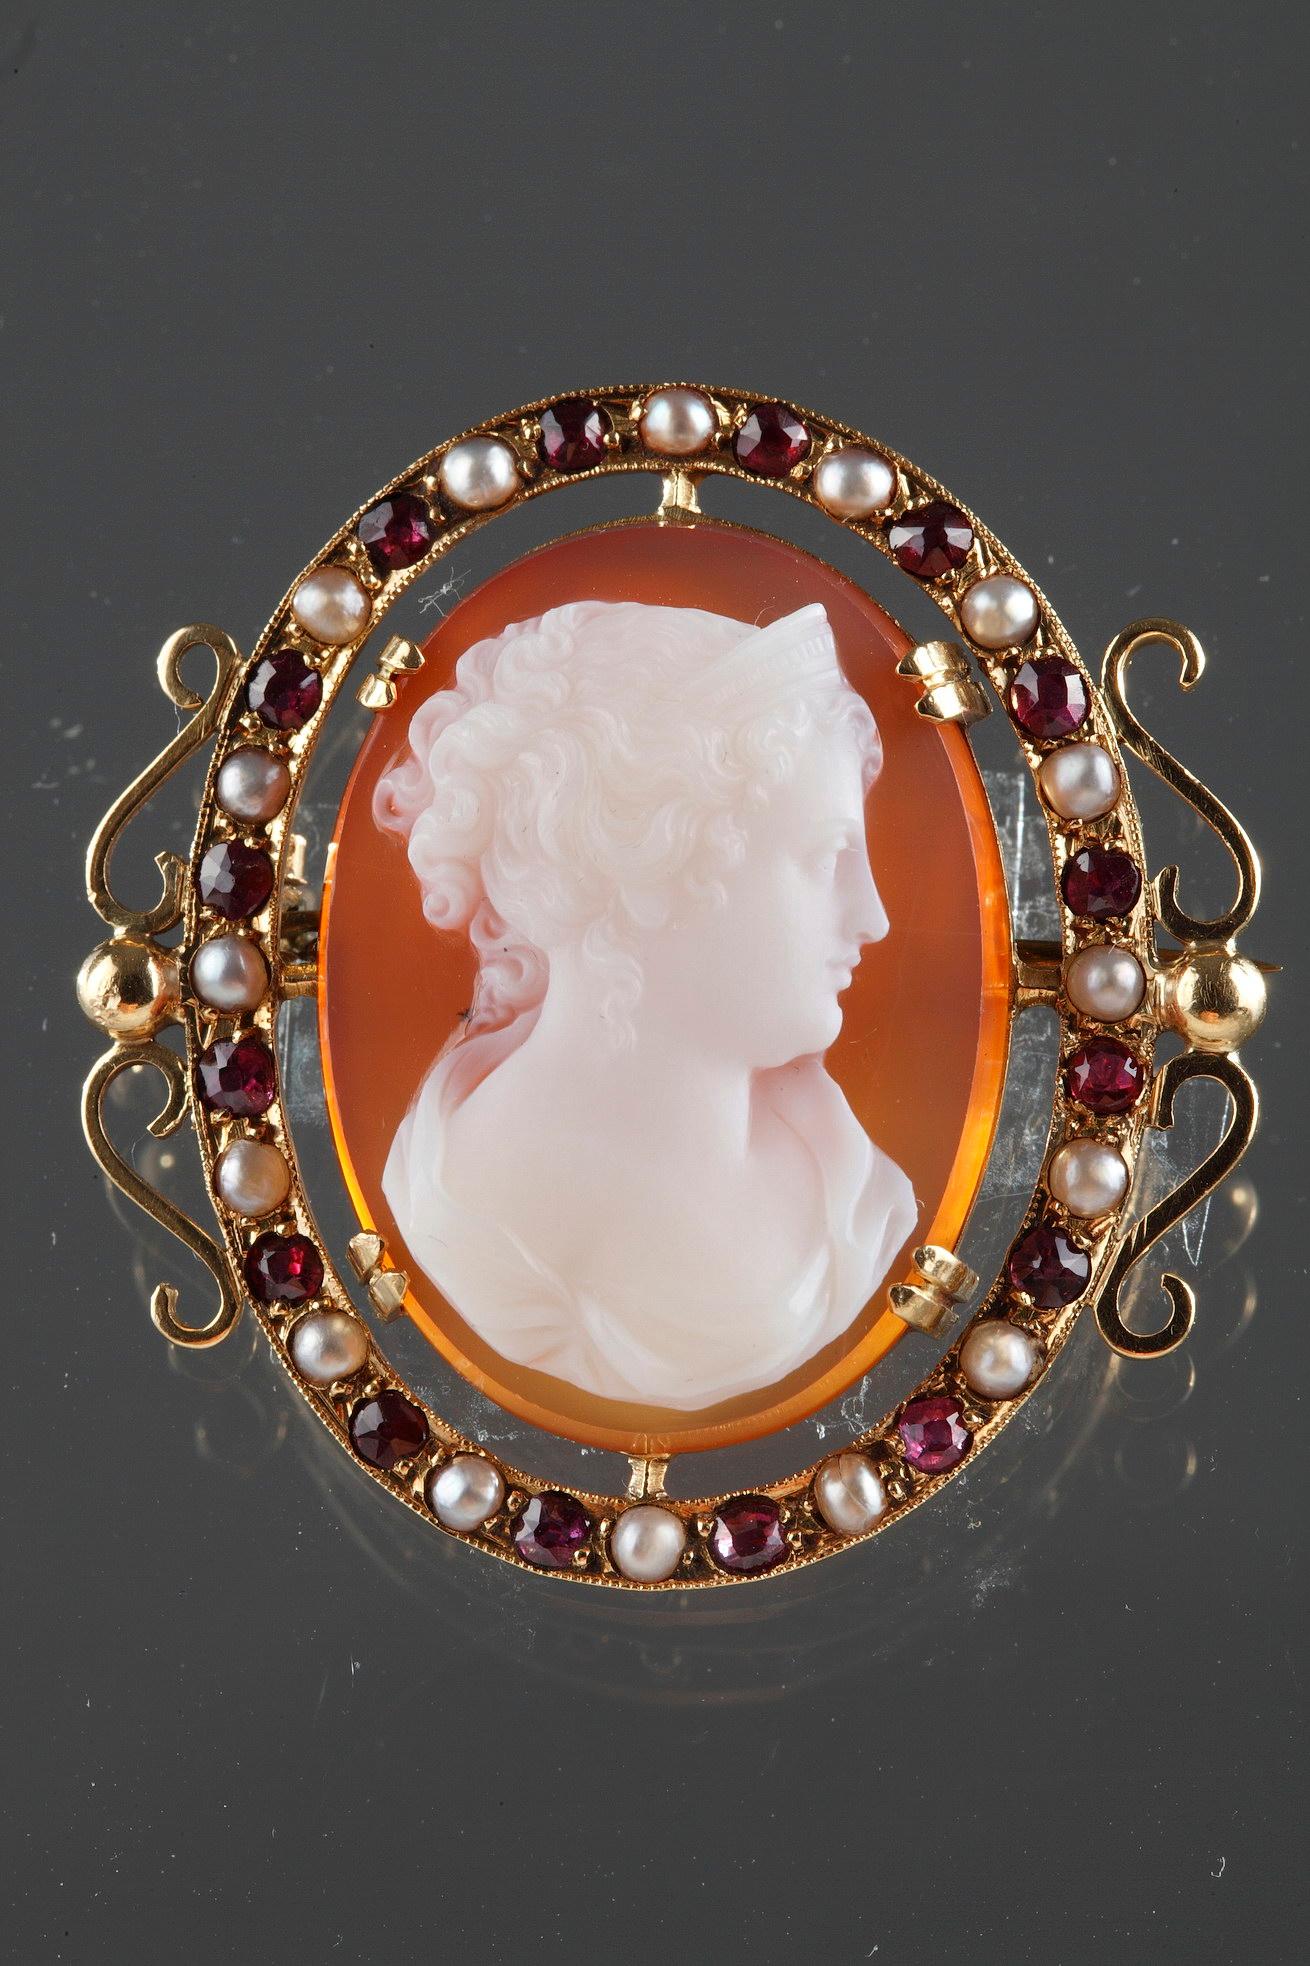 Cameo on pink agate featuring a young woman looking toward the wright. The artist intricately sculpted the white vein of the agate to bring the delicate profile to life. The young woman is wearing an antique dress This woman has her hair pulled back